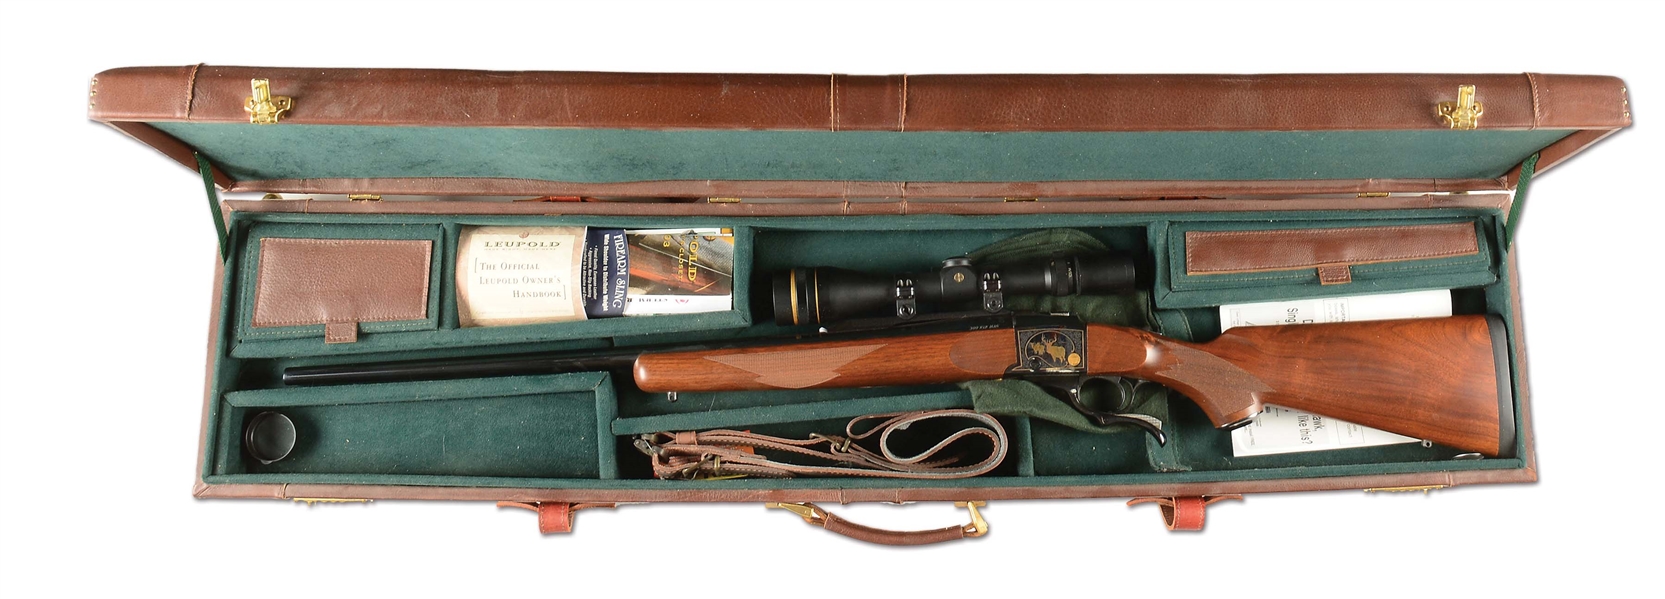 (M) CASED RUGER NO.1 SINGLE SHOT RIFLE WITH SCOPE.